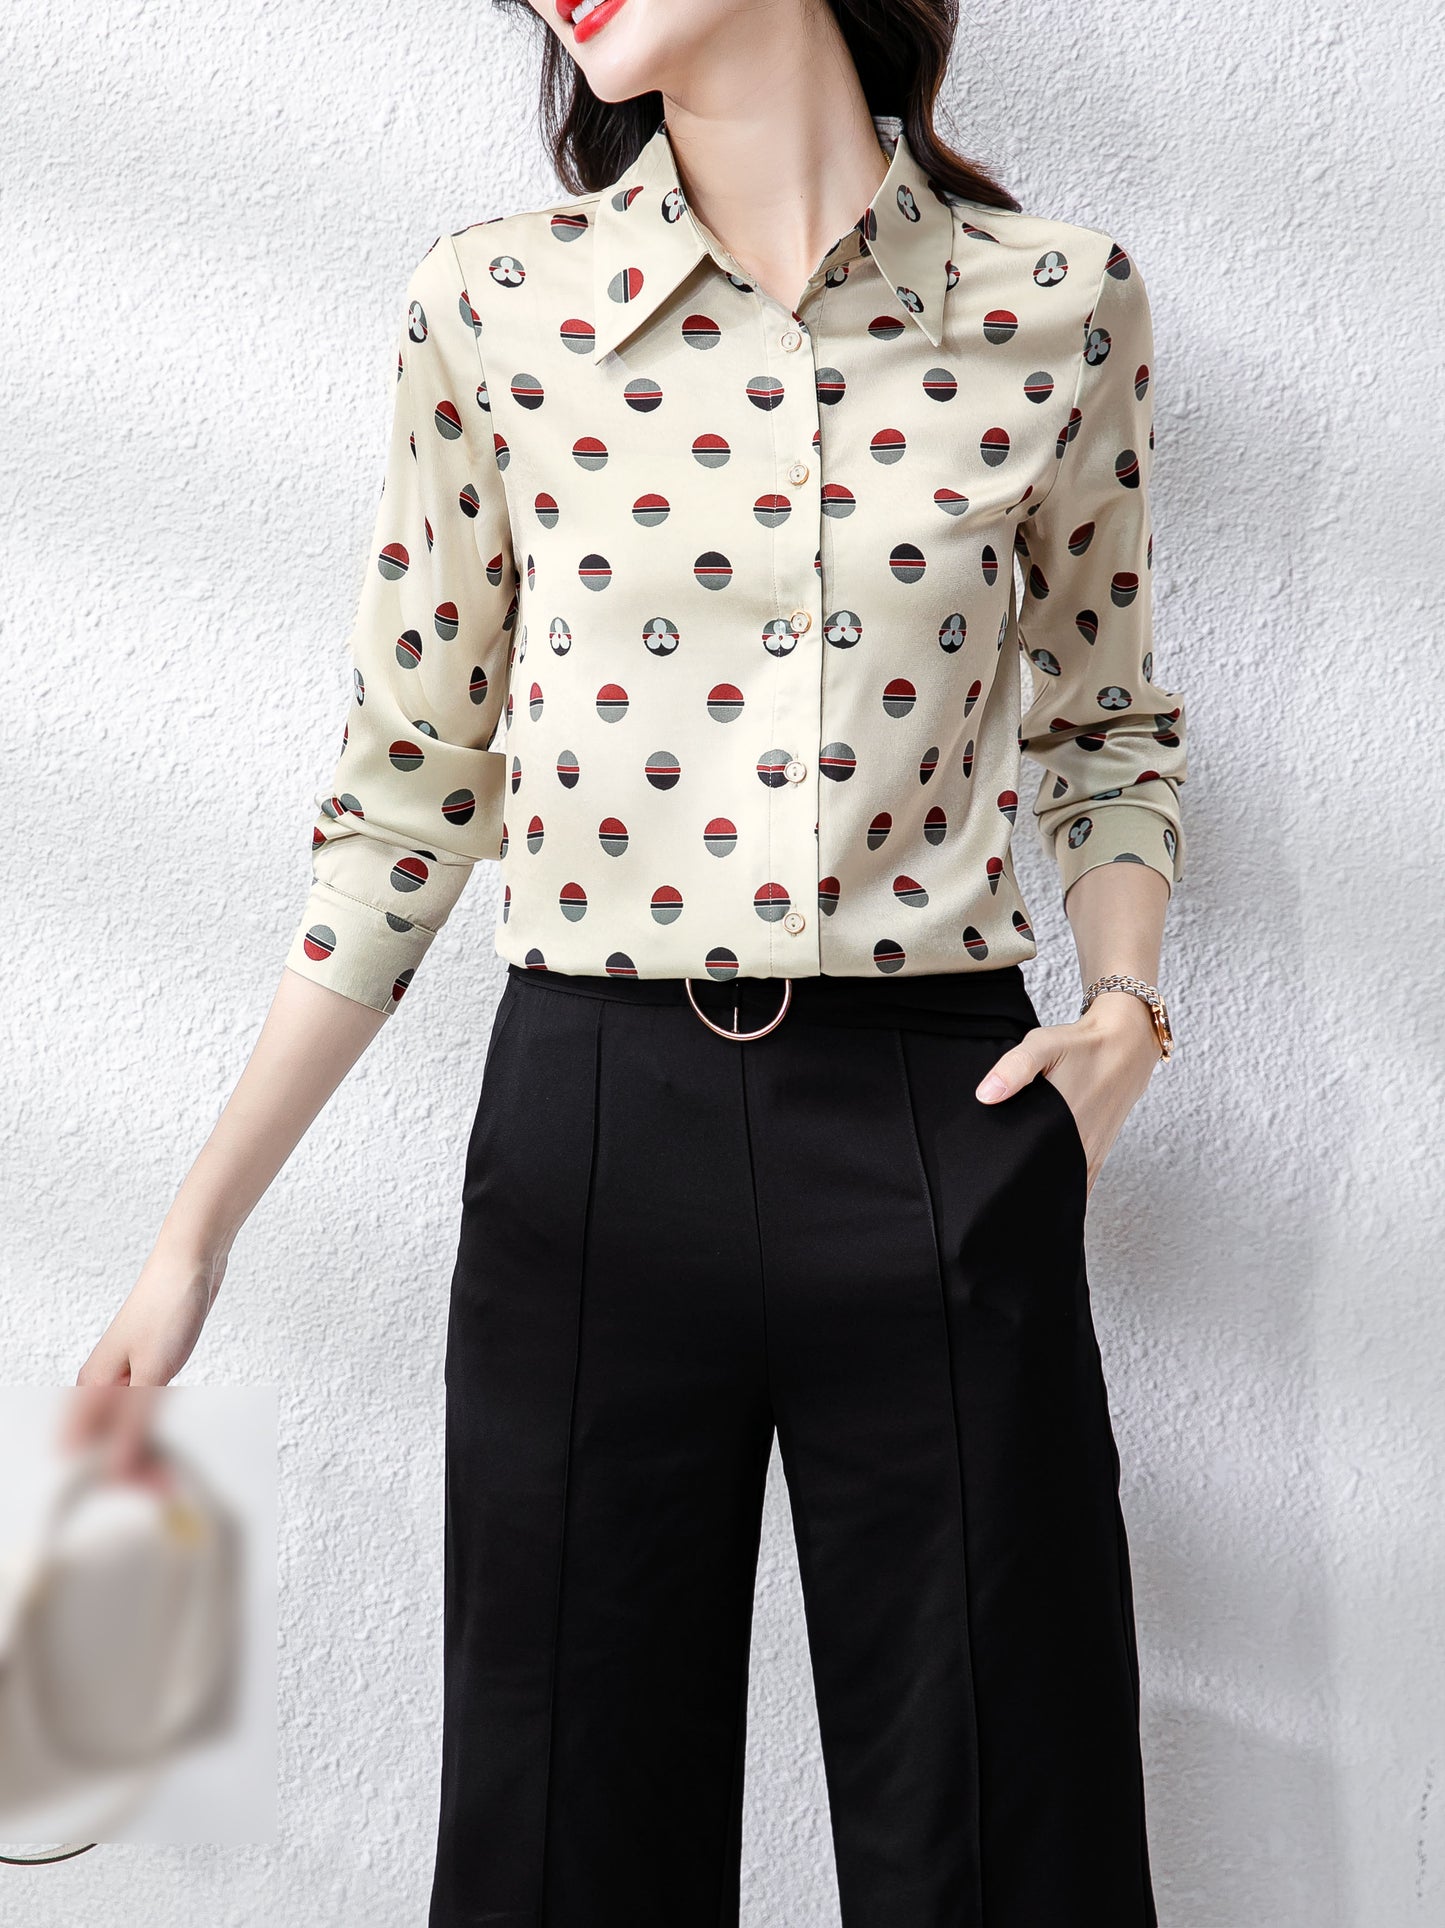 Yellow Collared Neckline Spots Long Sleeves Blouse Top Shirt